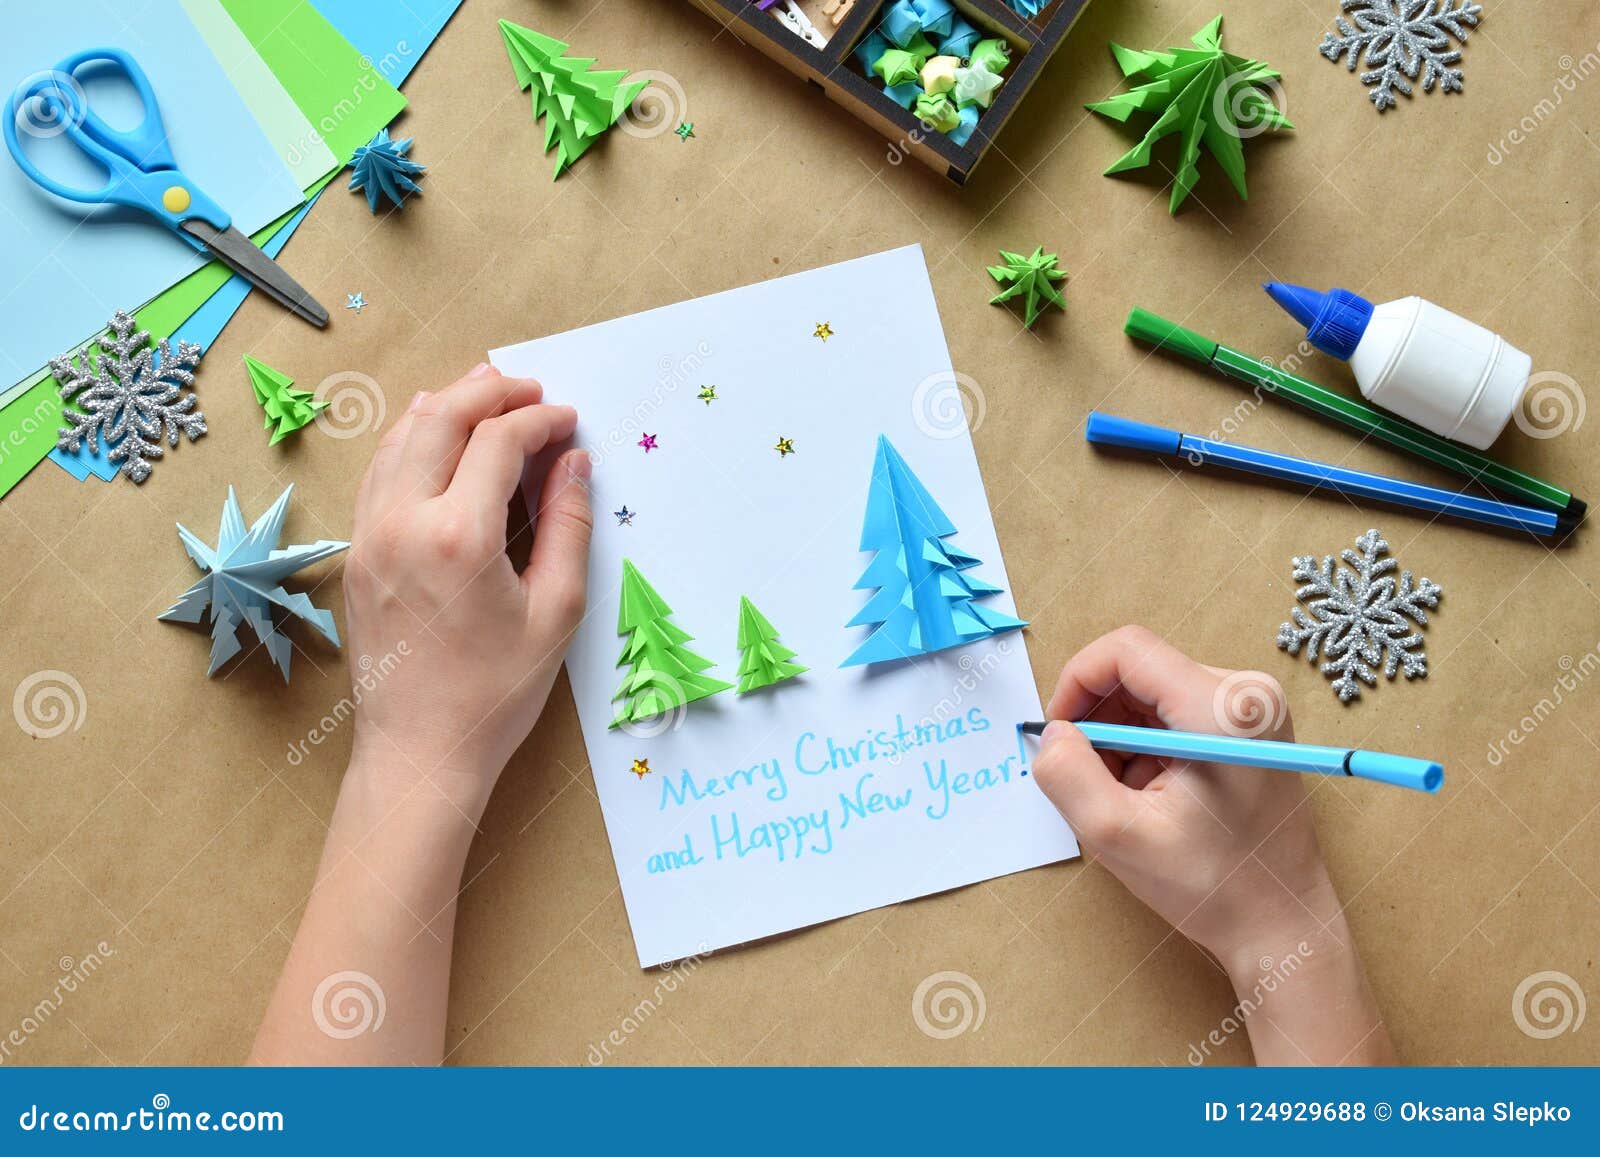 Making Greeting Card With Origami 3d Xmas Tree From Paper